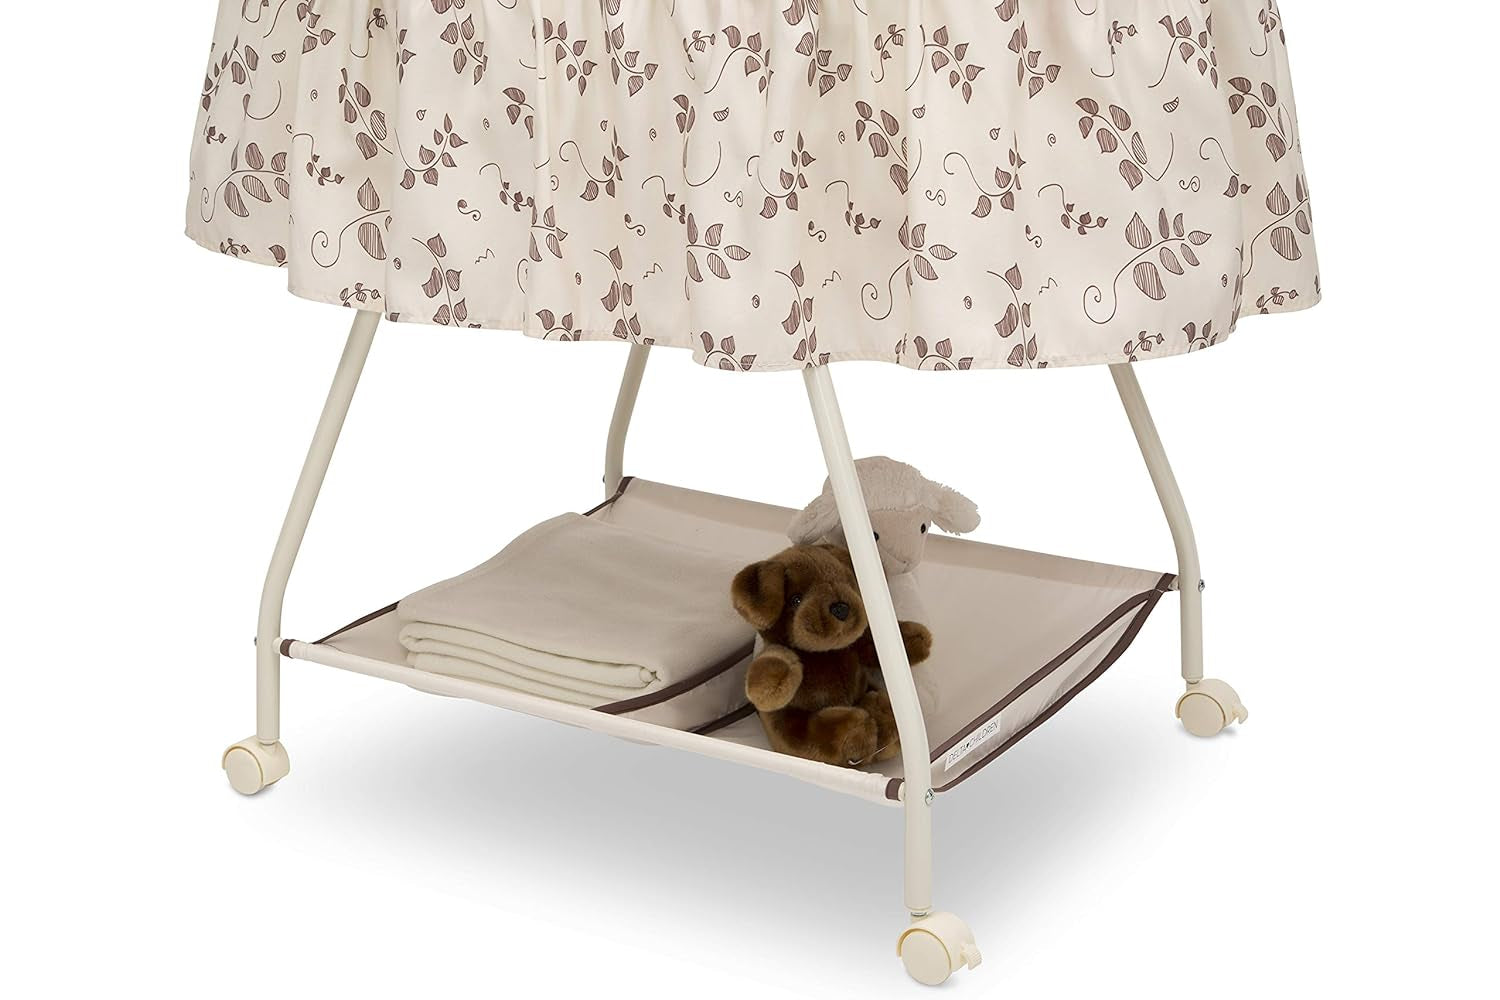 Deluxe Sweet Beginnings Bedside Bassinet - Portable Crib with Lights and Sounds, Falling Leaves - Design By Technique